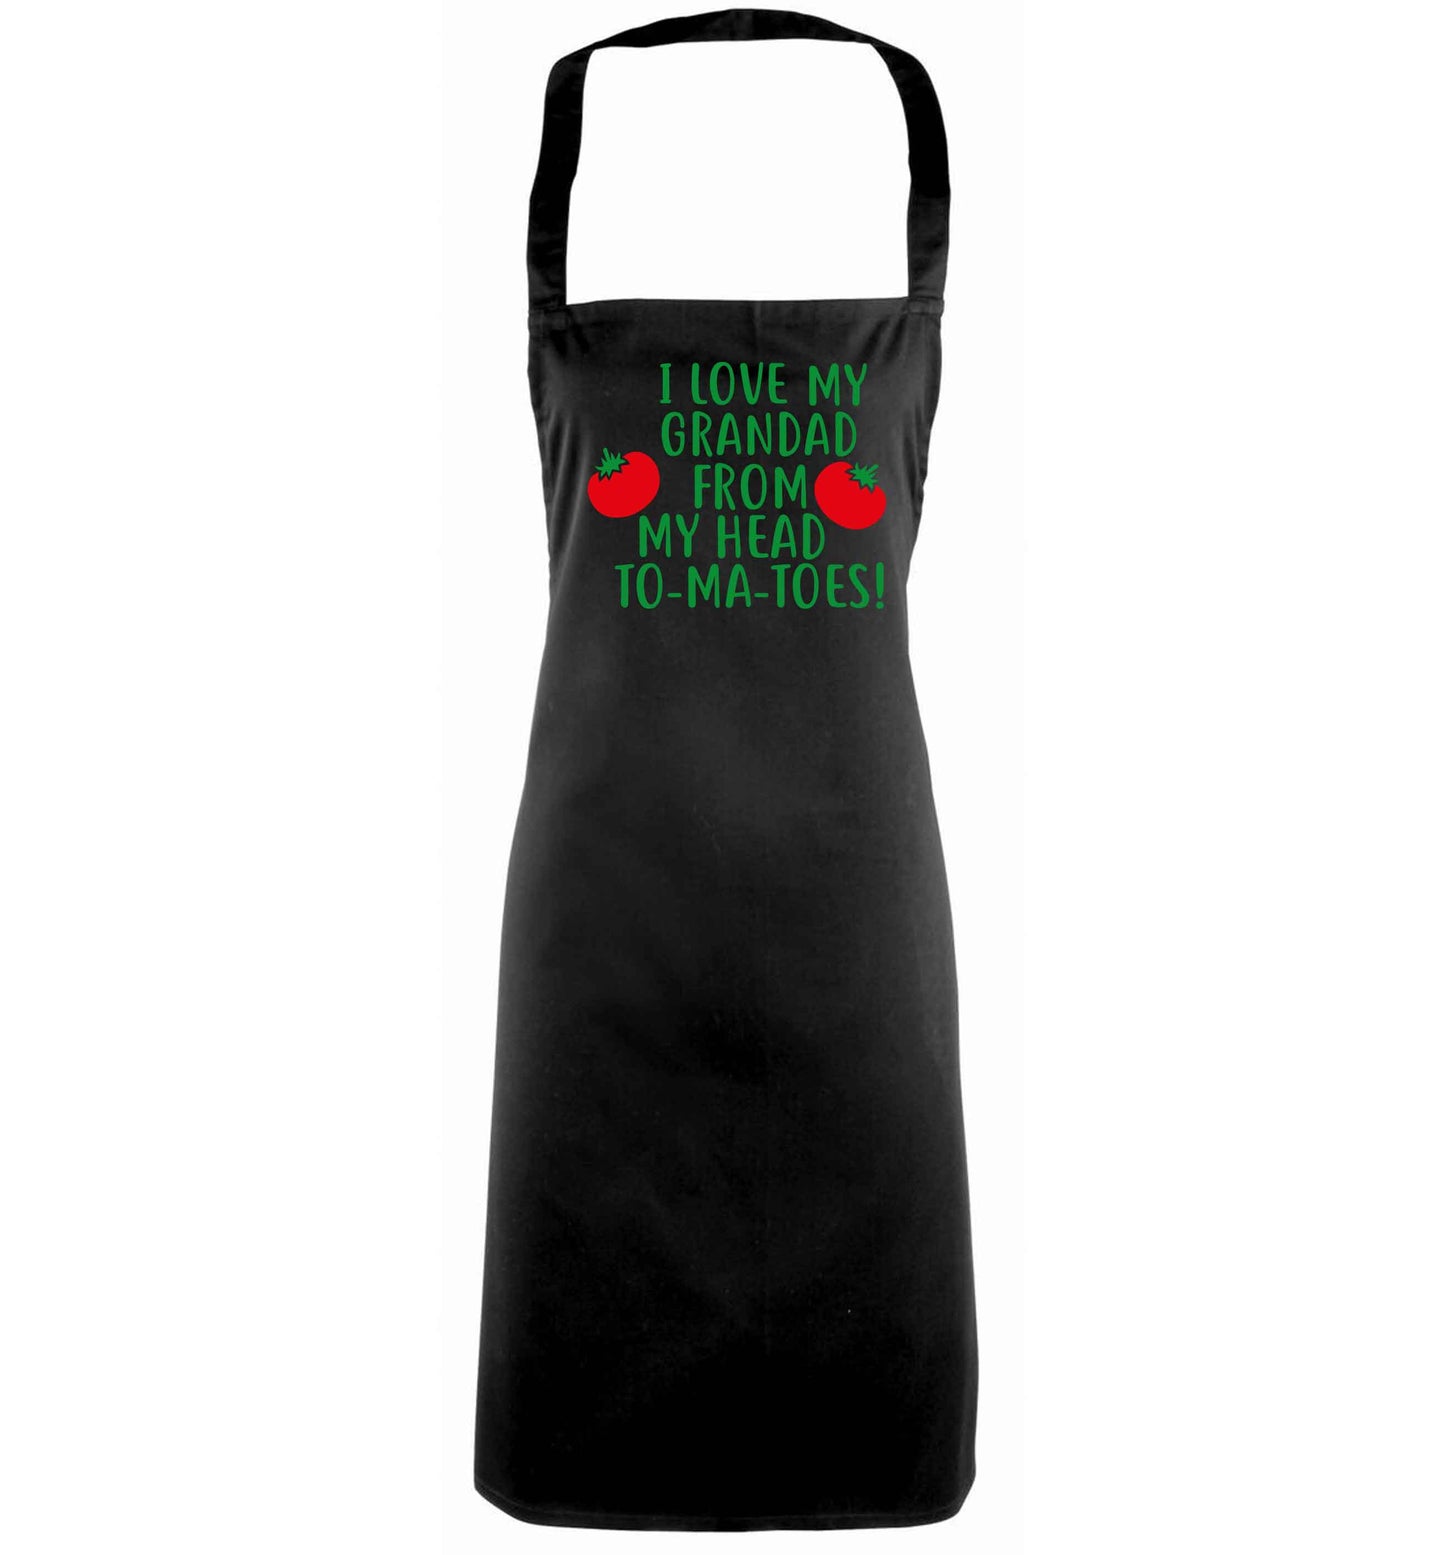 I love my grandad from my head To-Ma-Toes black apron